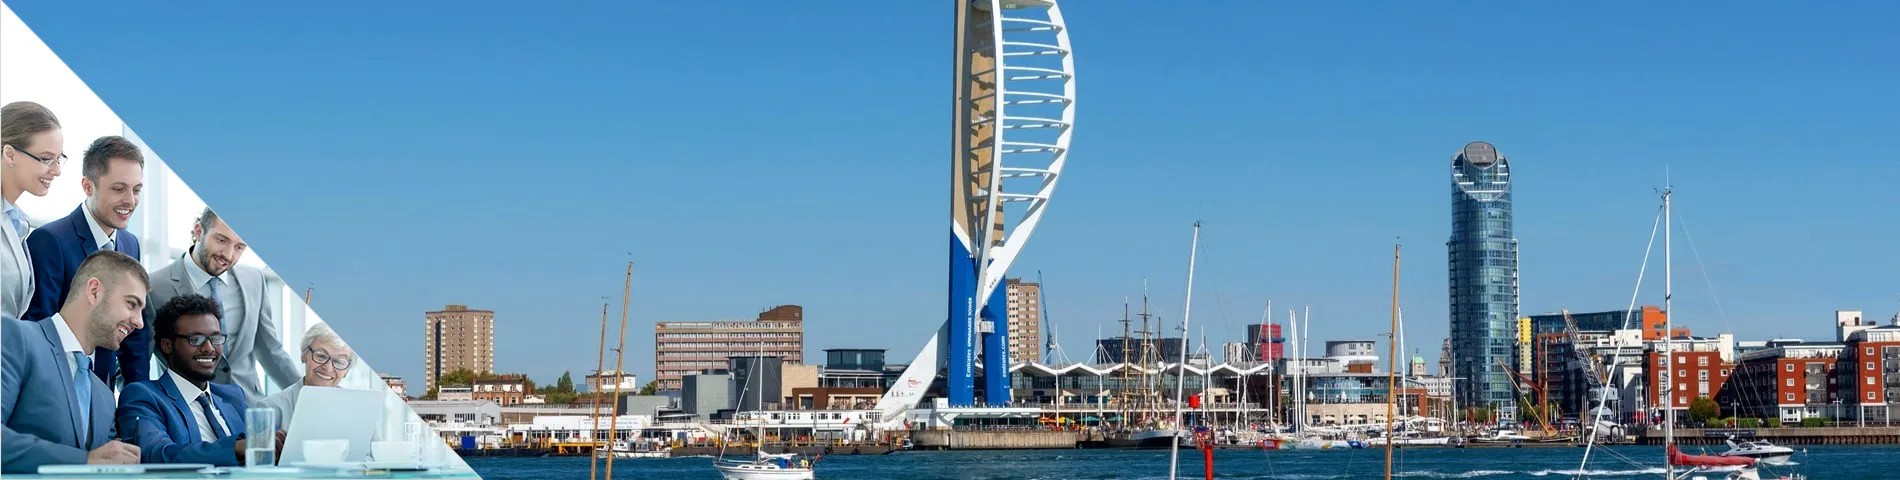 Portsmouth - Business Group